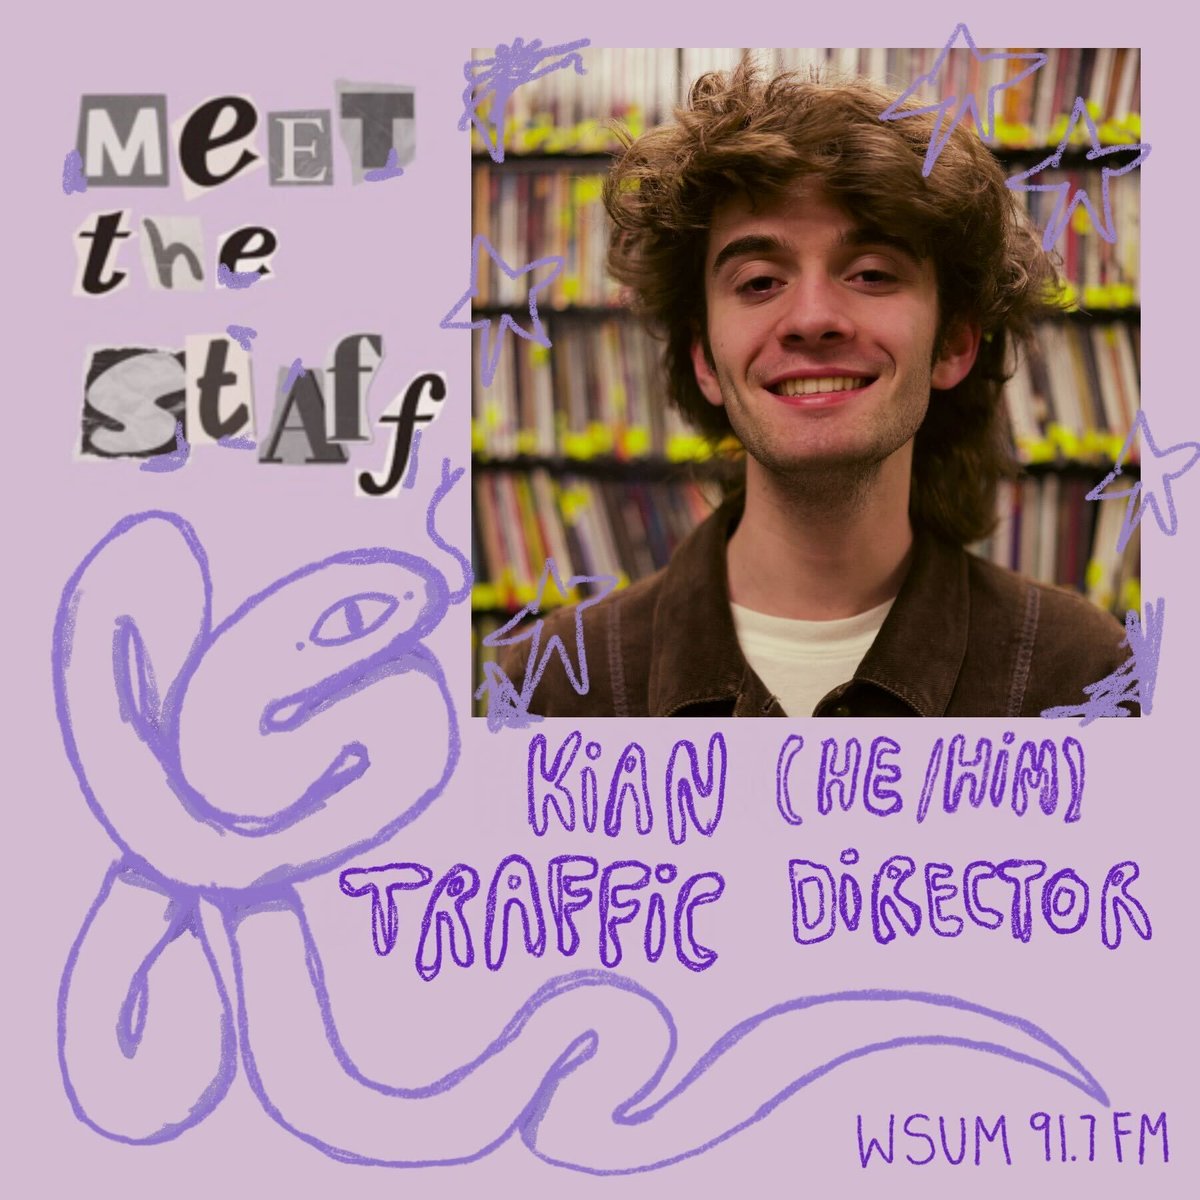 Meet The Staff!!! ☄️ Traffic Director ☄️ Kian Murphey (he/him) Tune into their show Deep Dive at Midnights on Saturdays on the FM signal, 'explore a new genre every week!'